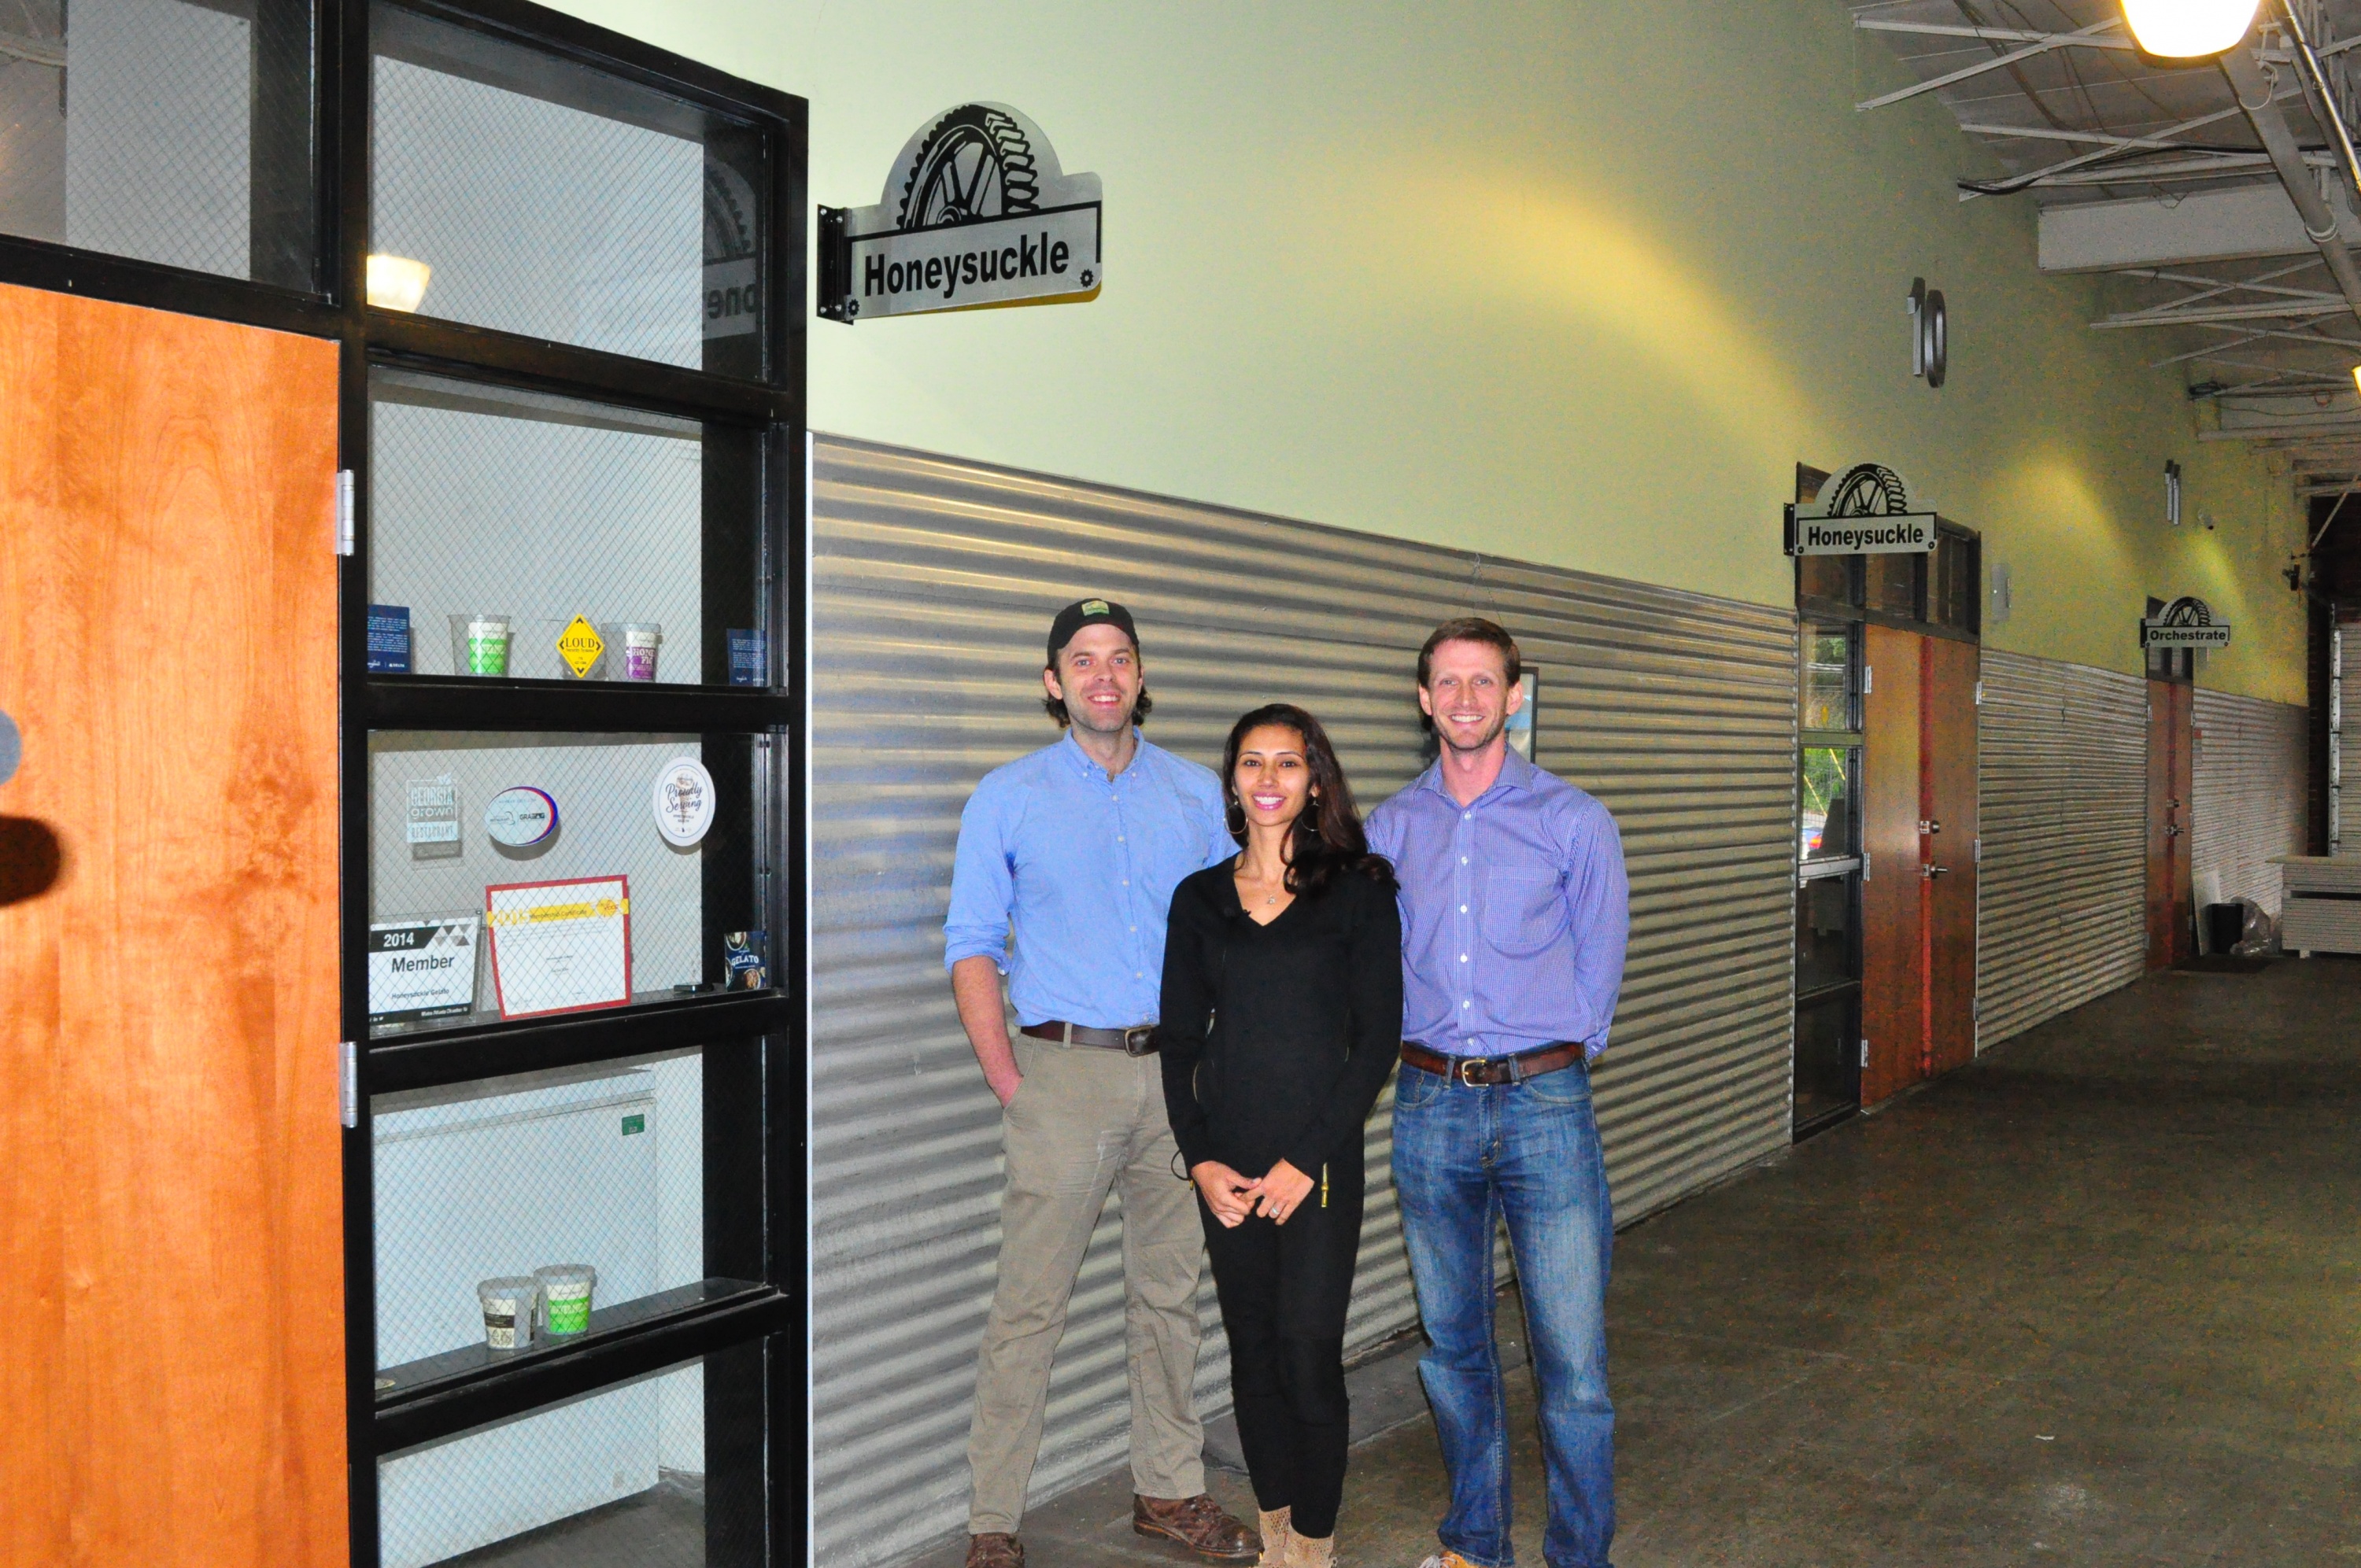 Meet (frome left to right) Jackson Smith, Khatera Ballard, and Wes Jones owners of Honeysuckle Gelato, a craft gelato manufacturing company in Atlanta. Smith, Ballard, and Jones are the December Faces of Manufacturing, program developed by the Georgia Manufacturing Extension Partnership (GaMEP) at Georgia Tech to honor people who work in or are affected by manufacturing in Georgia.